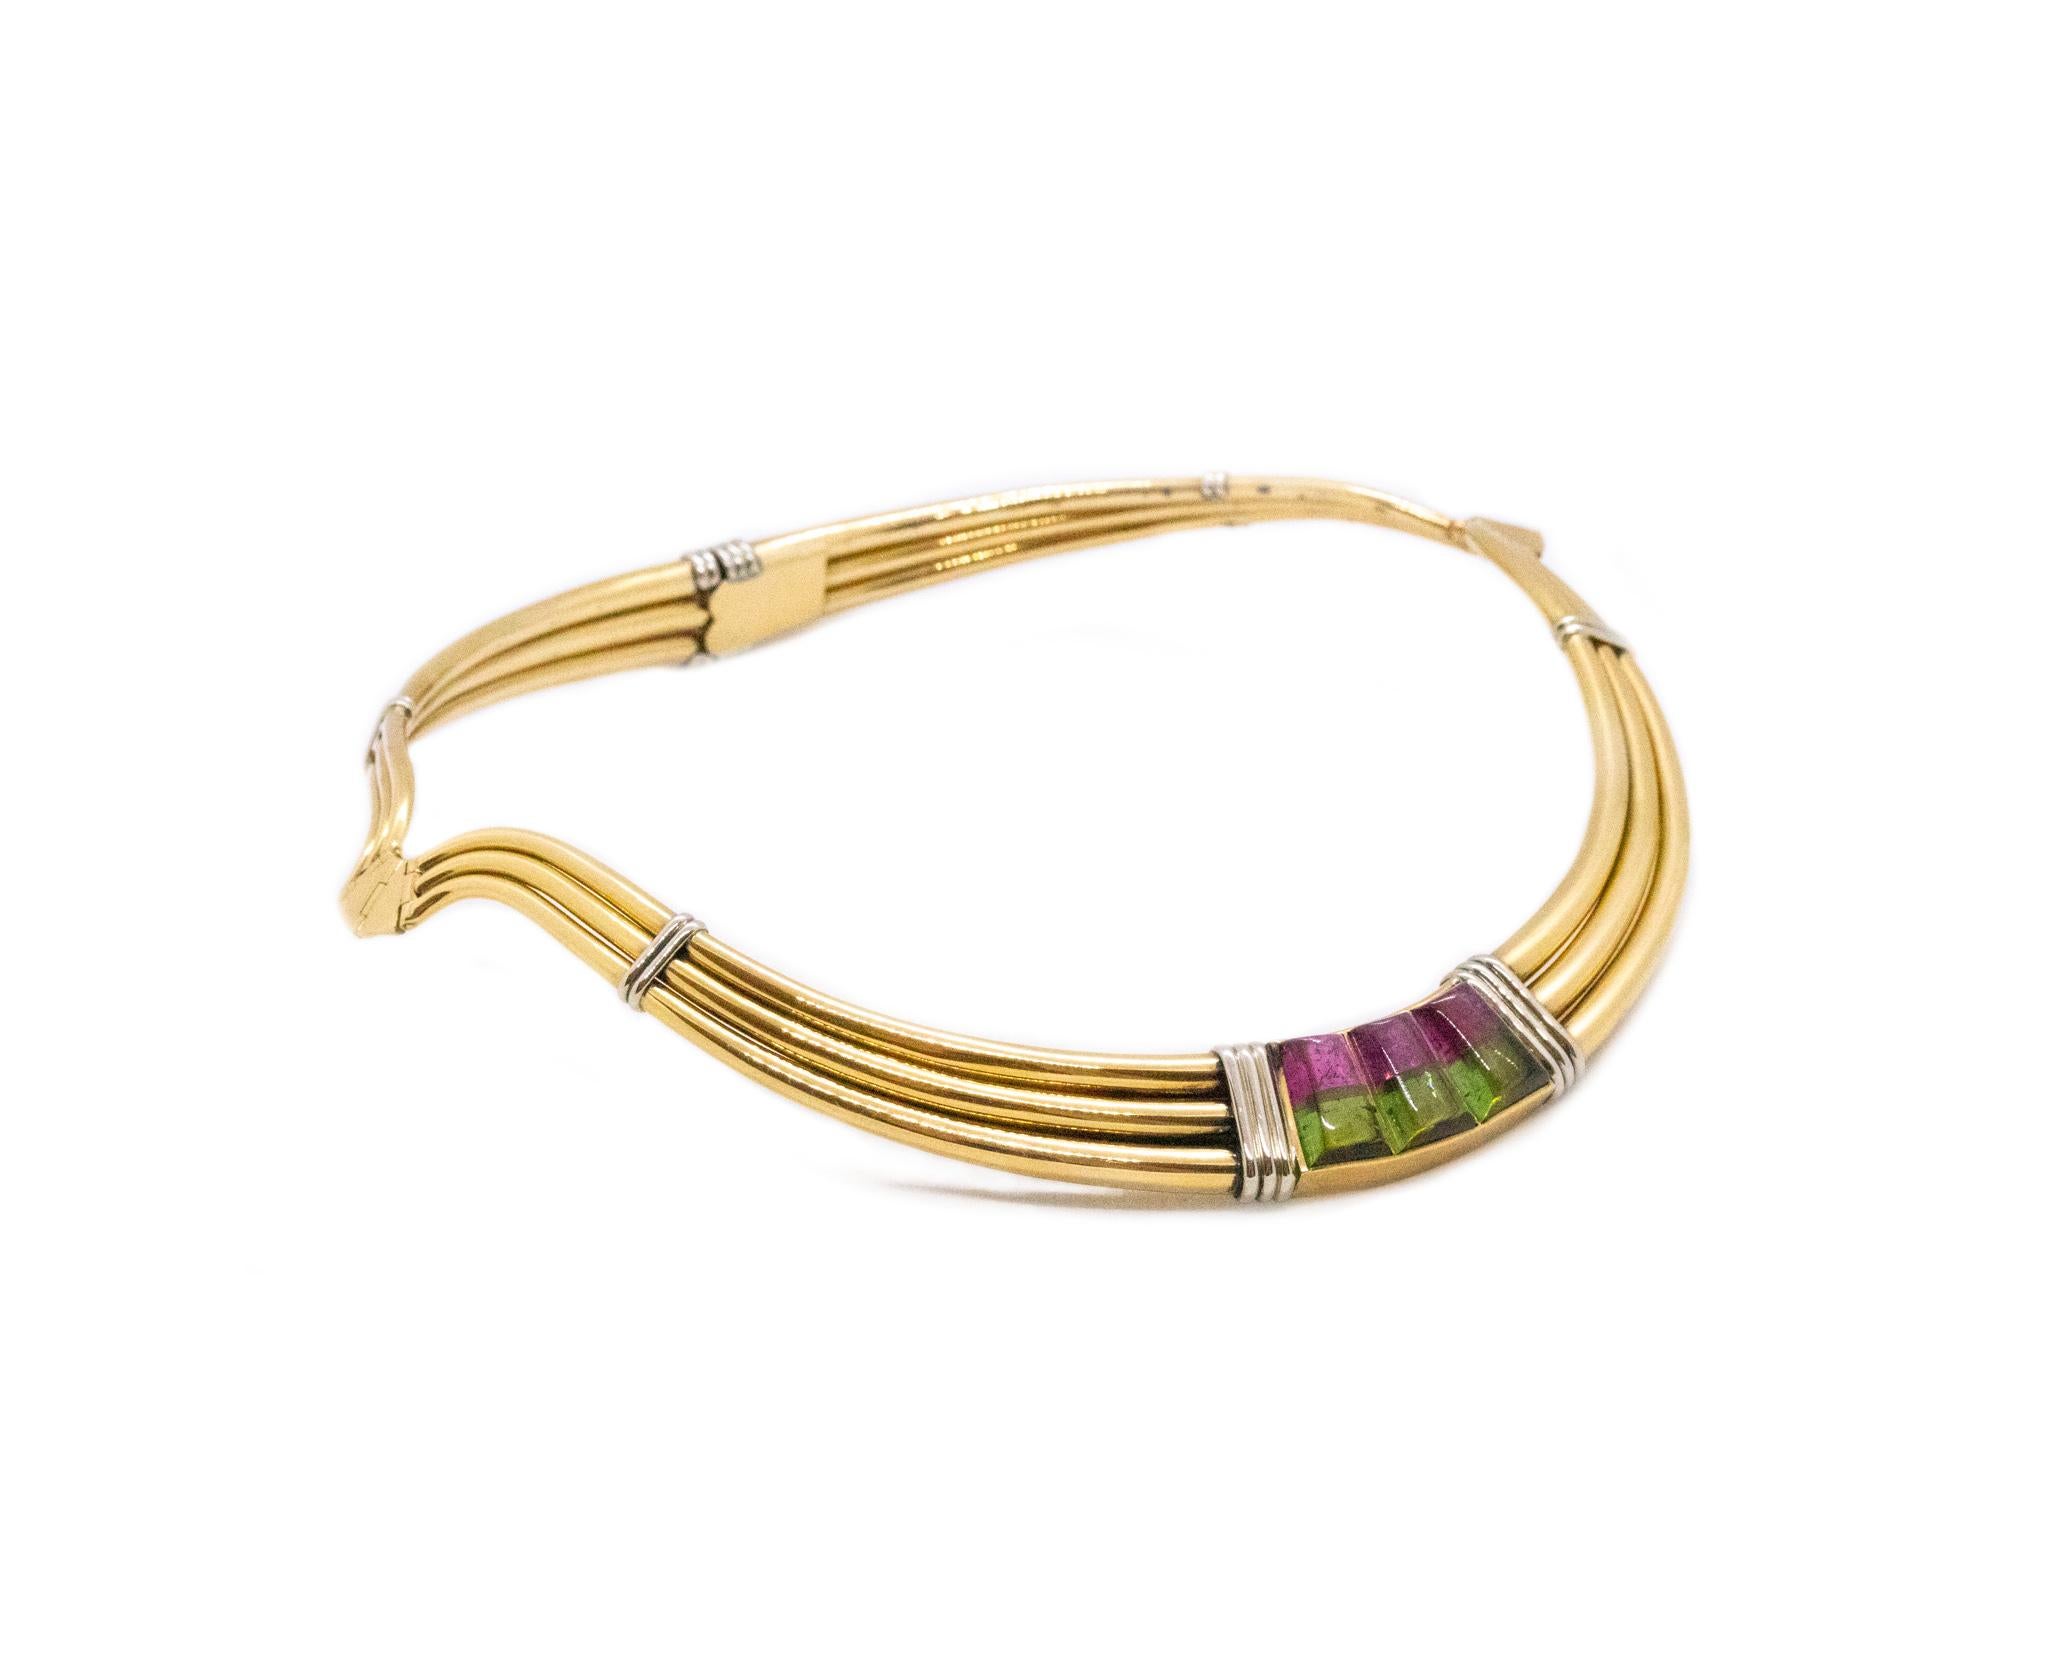 Gucci 1970 Milan Very Rare Choker Necklace 18Kt Gold 16.02 Cts in Tourmaline 1